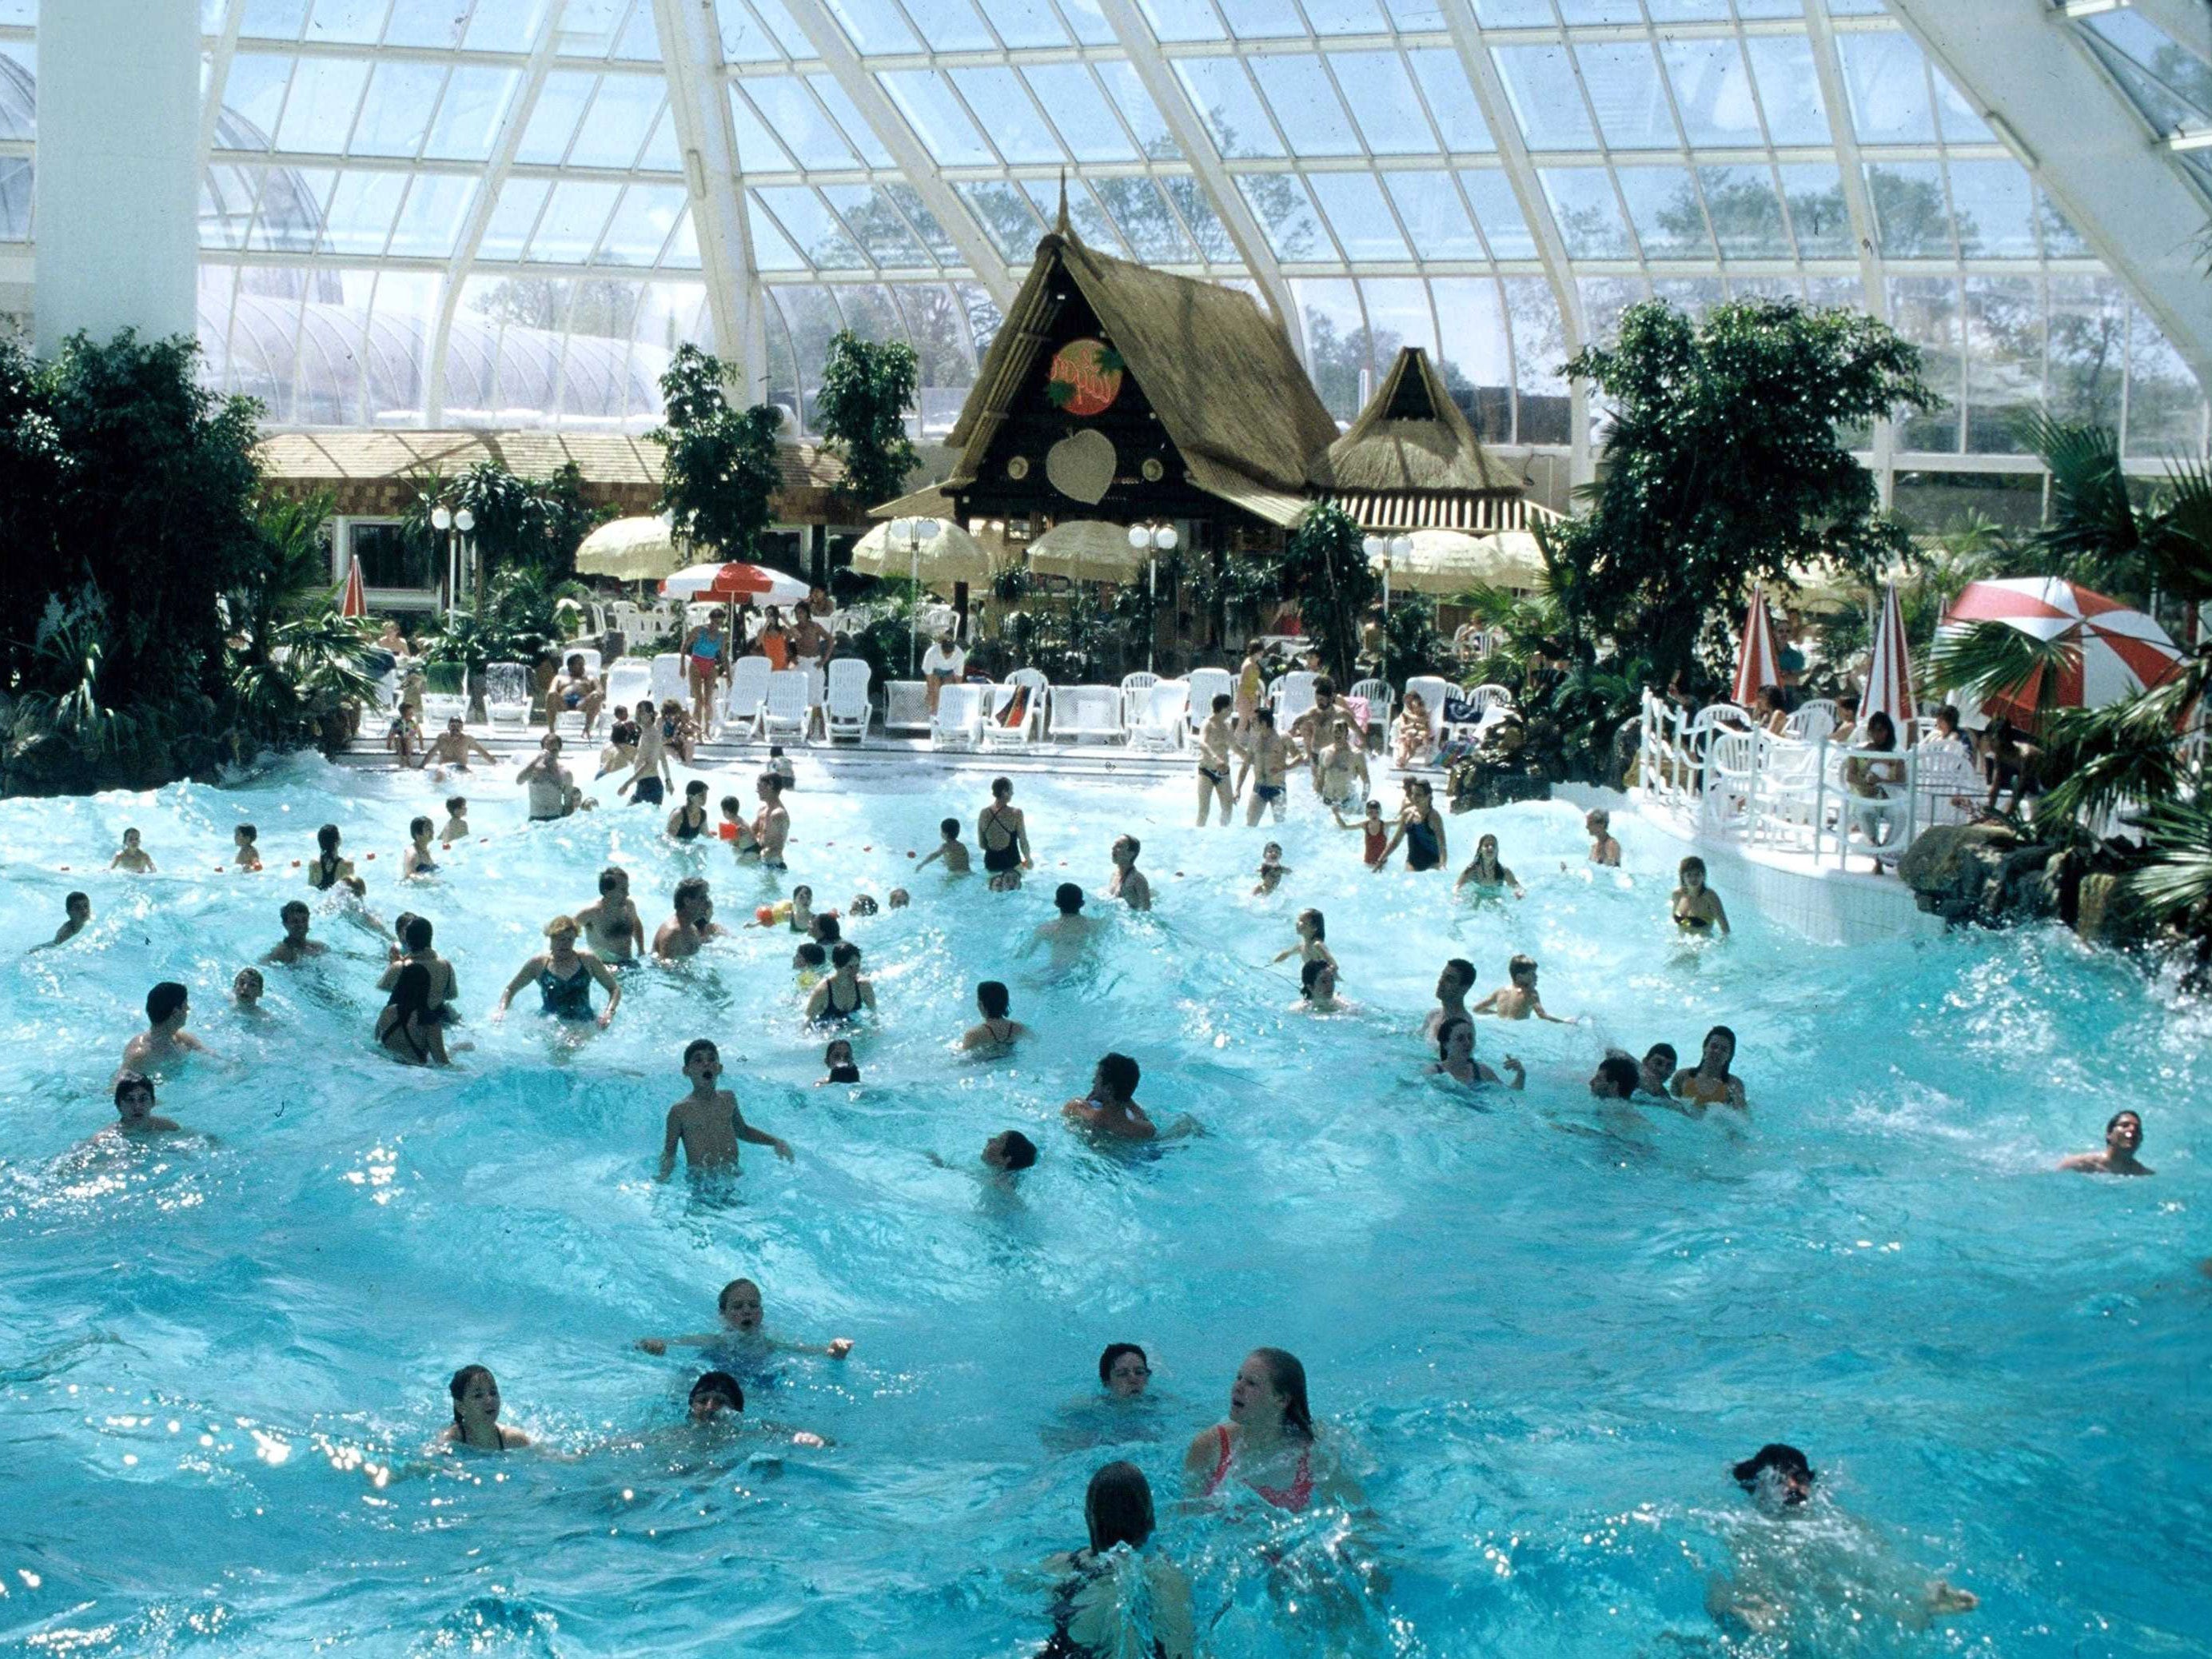 Center Parcs made £147m last year, up from £140m in 2013.